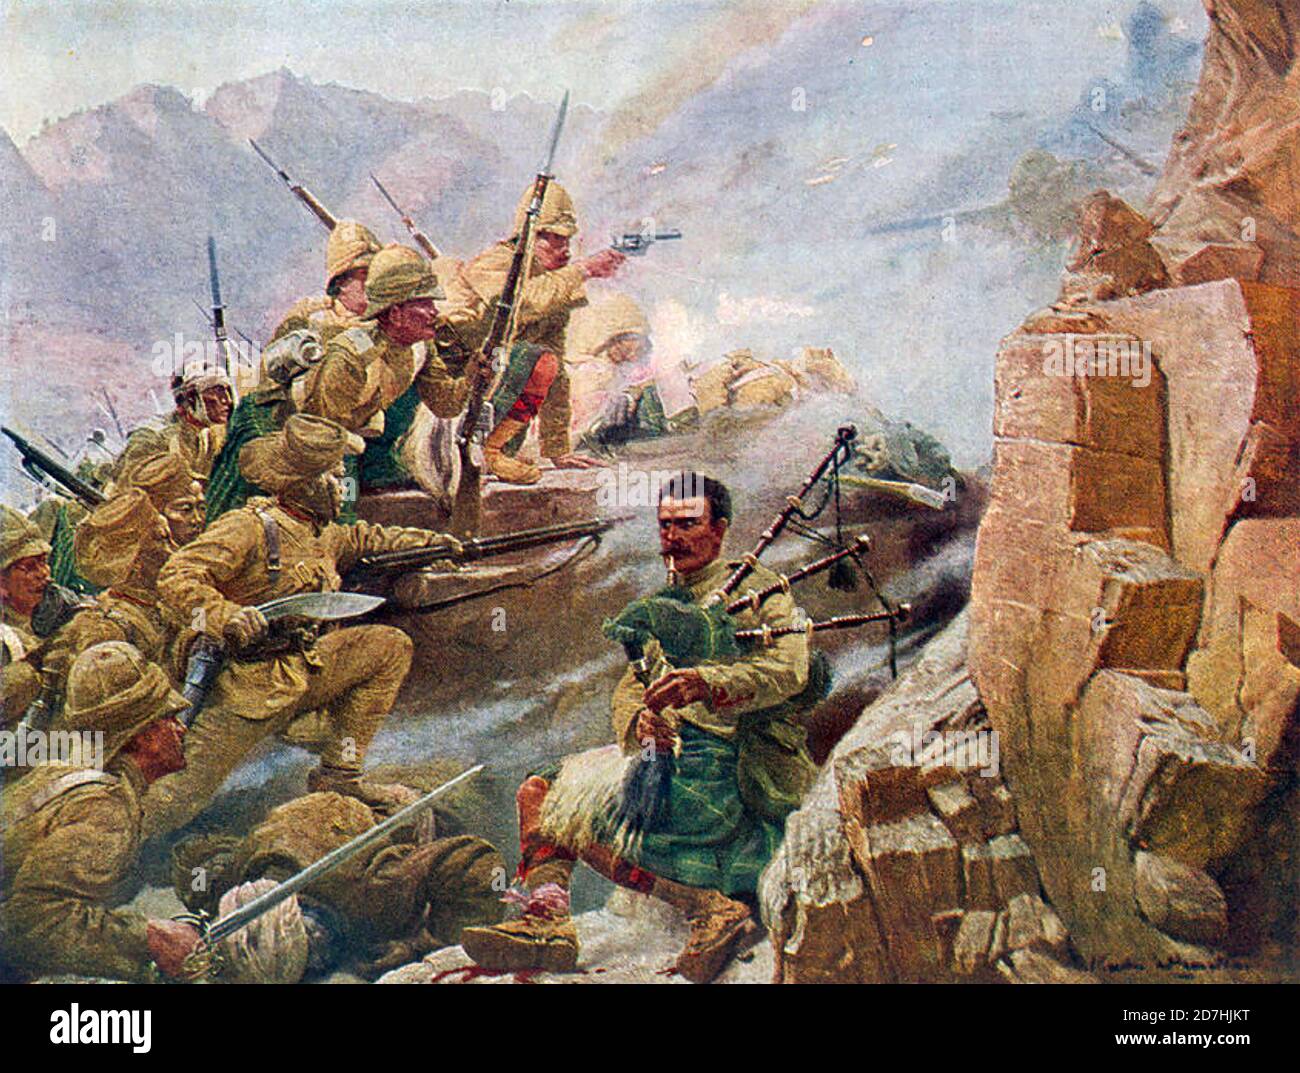 STORMING OF THE DARGAI HEIGHTS, Malakand, in what is now Pakistan,  on 20 October 1897 by the Gordon Highlanders and the 2nd King Edward's VIII's Own Gurkha Rifles. The action resulted in the award of four Victoria Crosses. Stock Photo